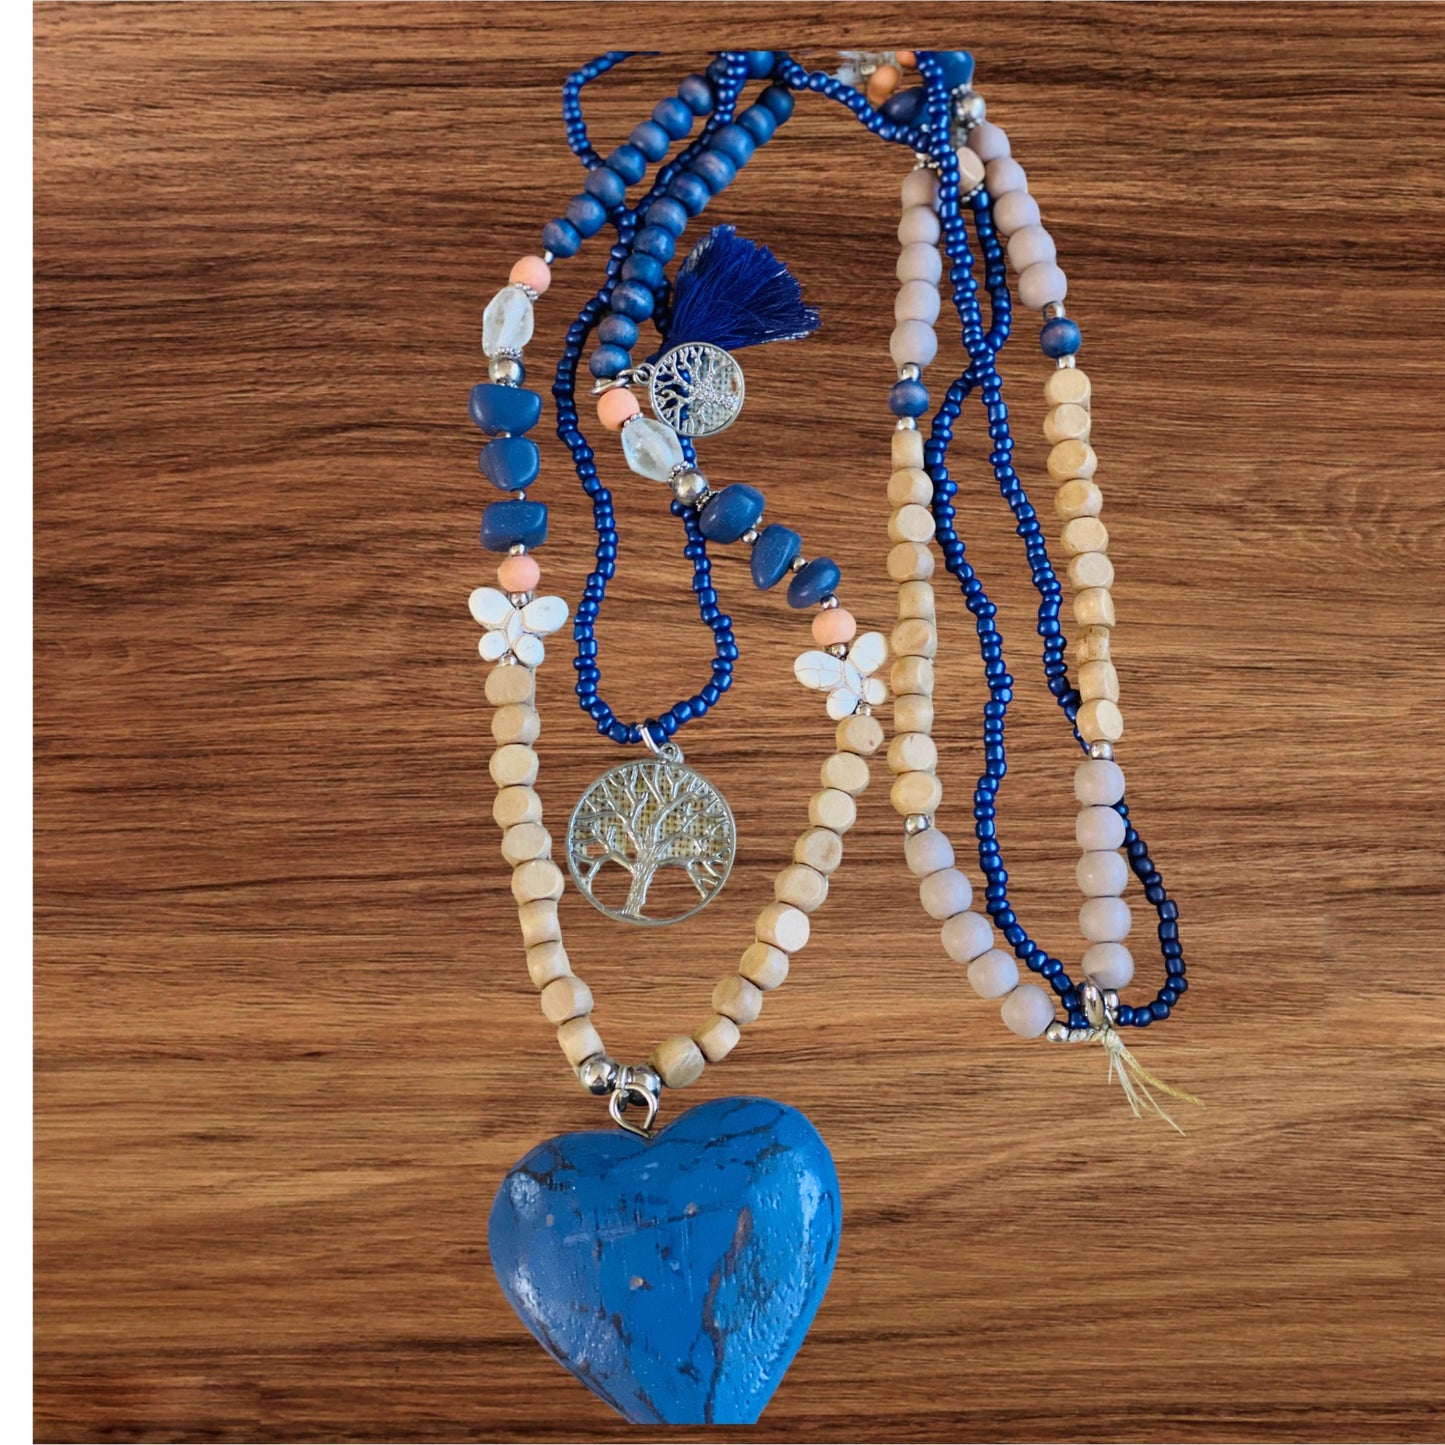 Heart Double Garland Necklace Blue with Charms